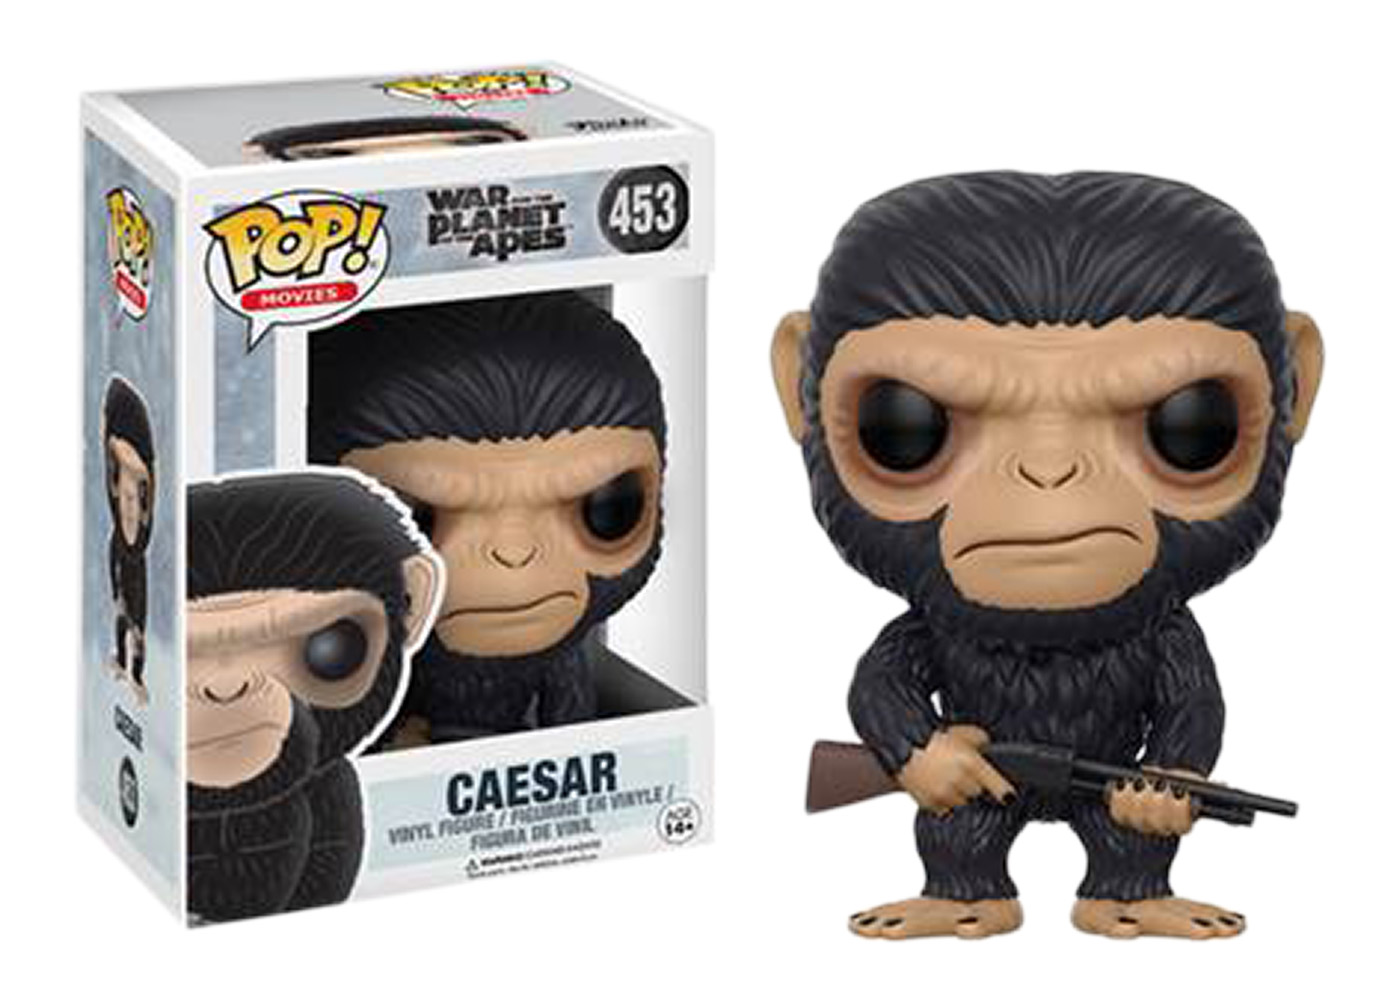 Funko Pop! Movies War for the Planet of the Apes Caesar Figure